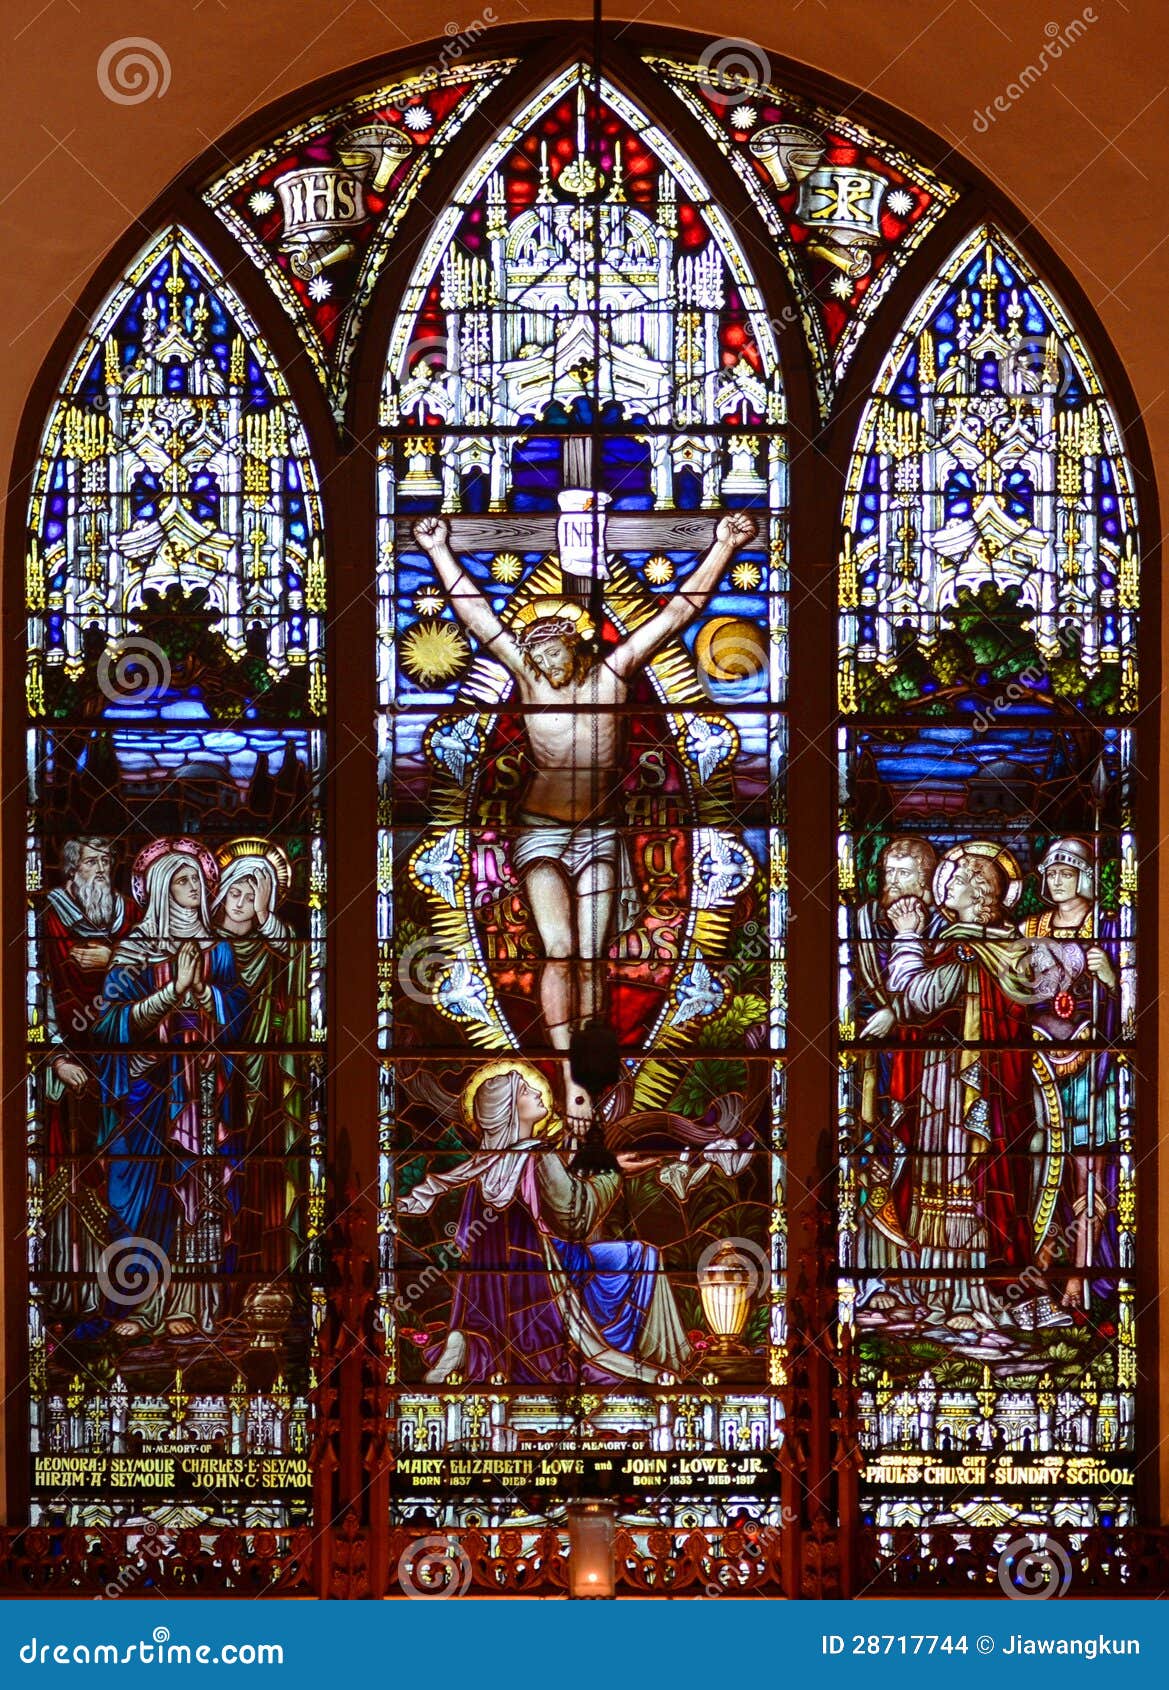 stained glass window of st paul's episcopal church